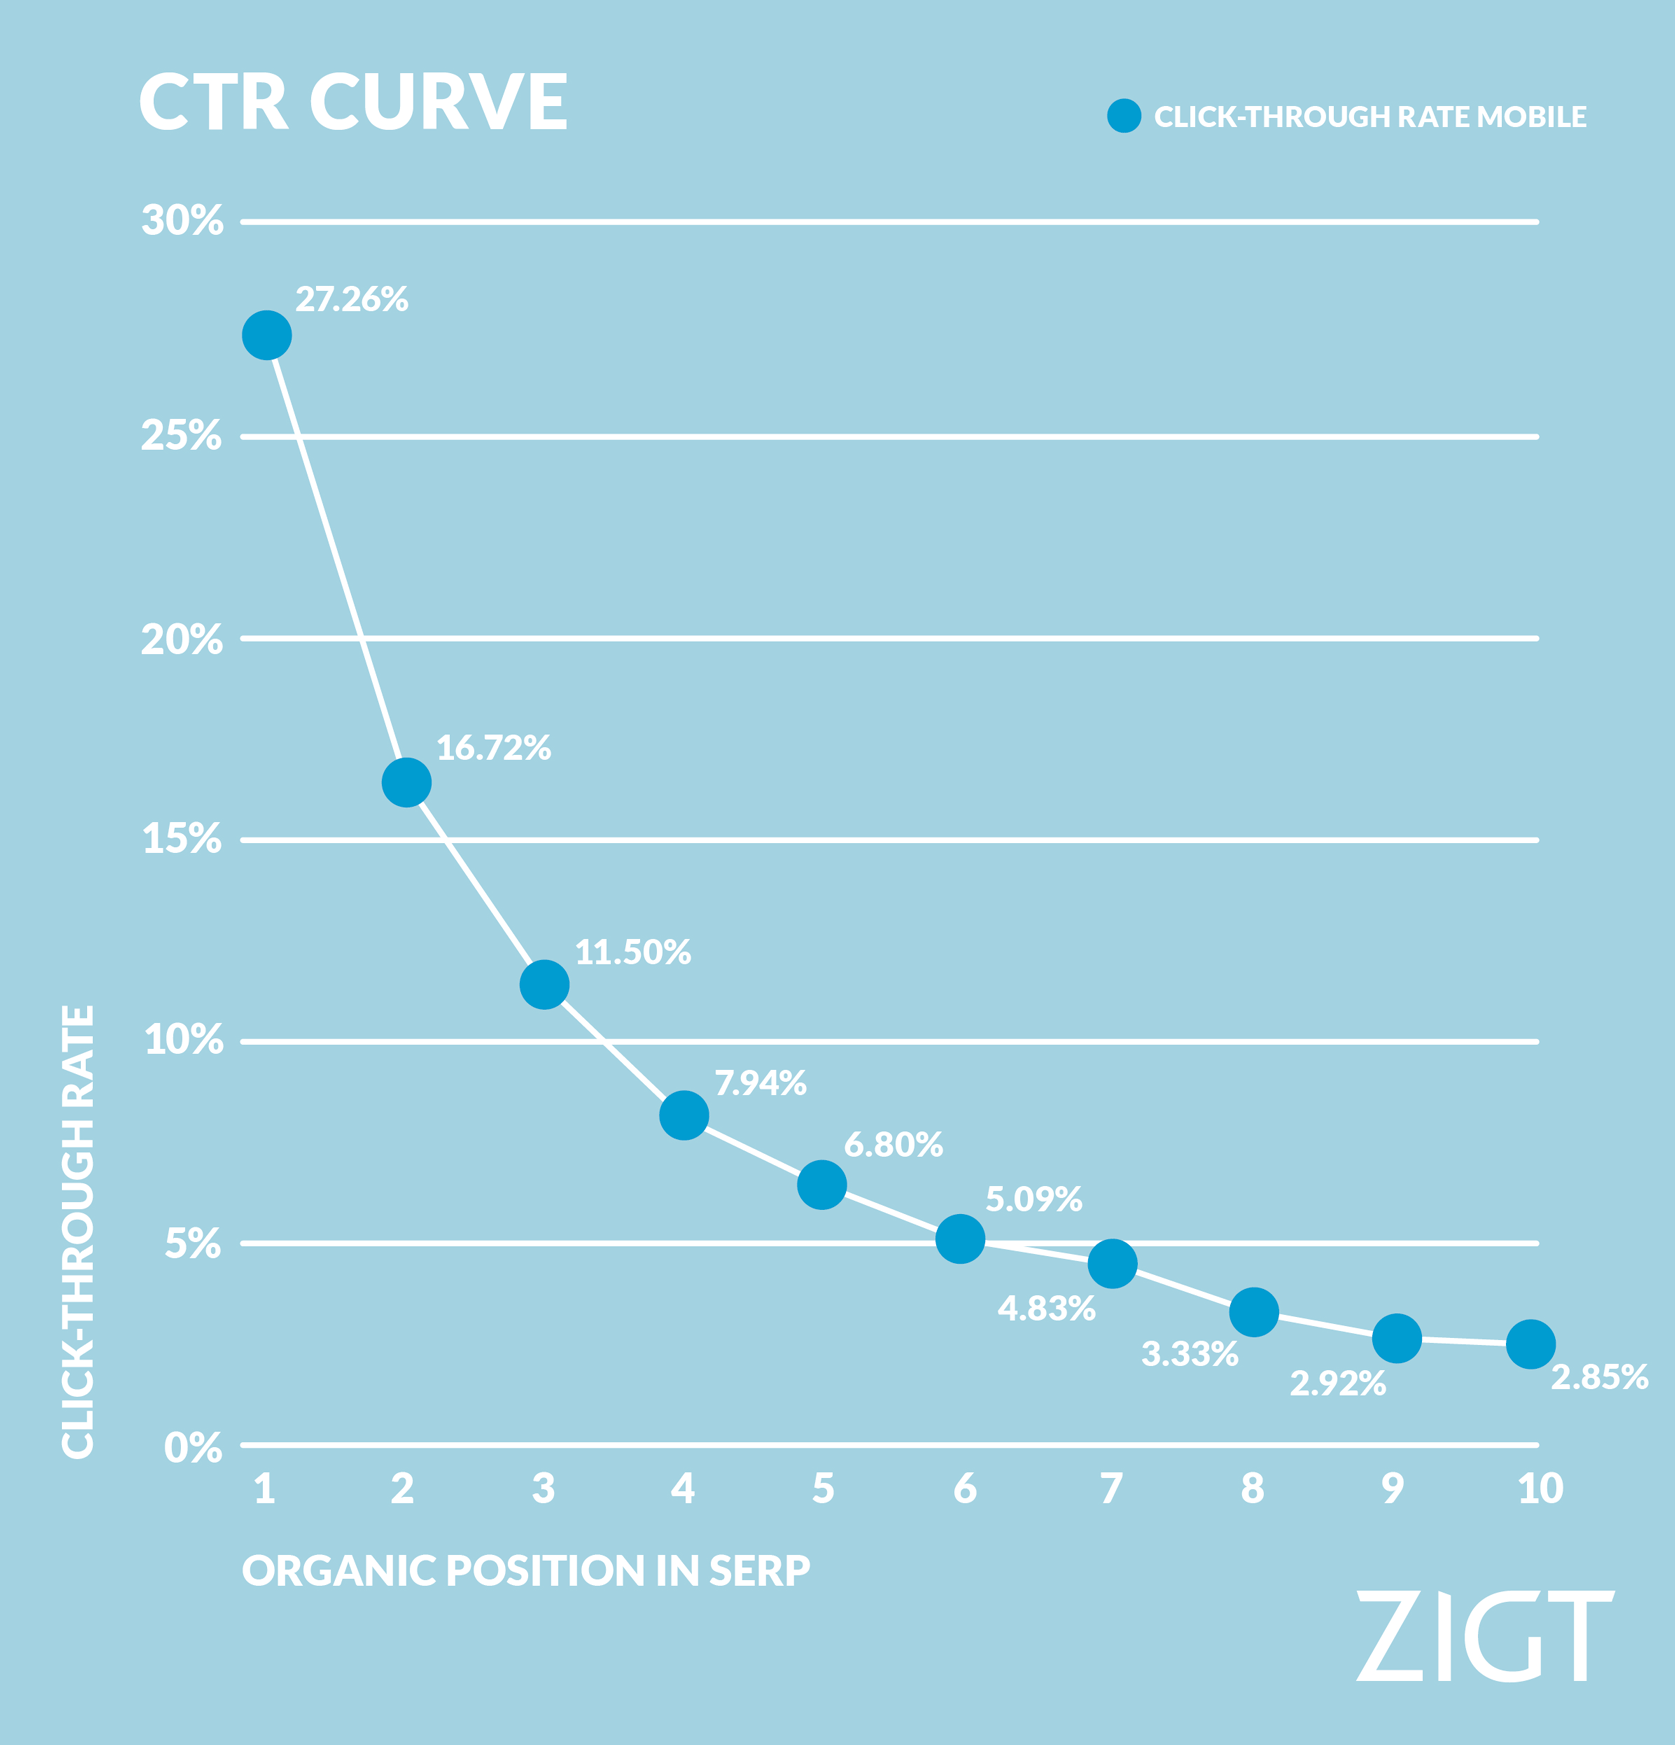 Mobile CTR curve of top 10 positions in Google.